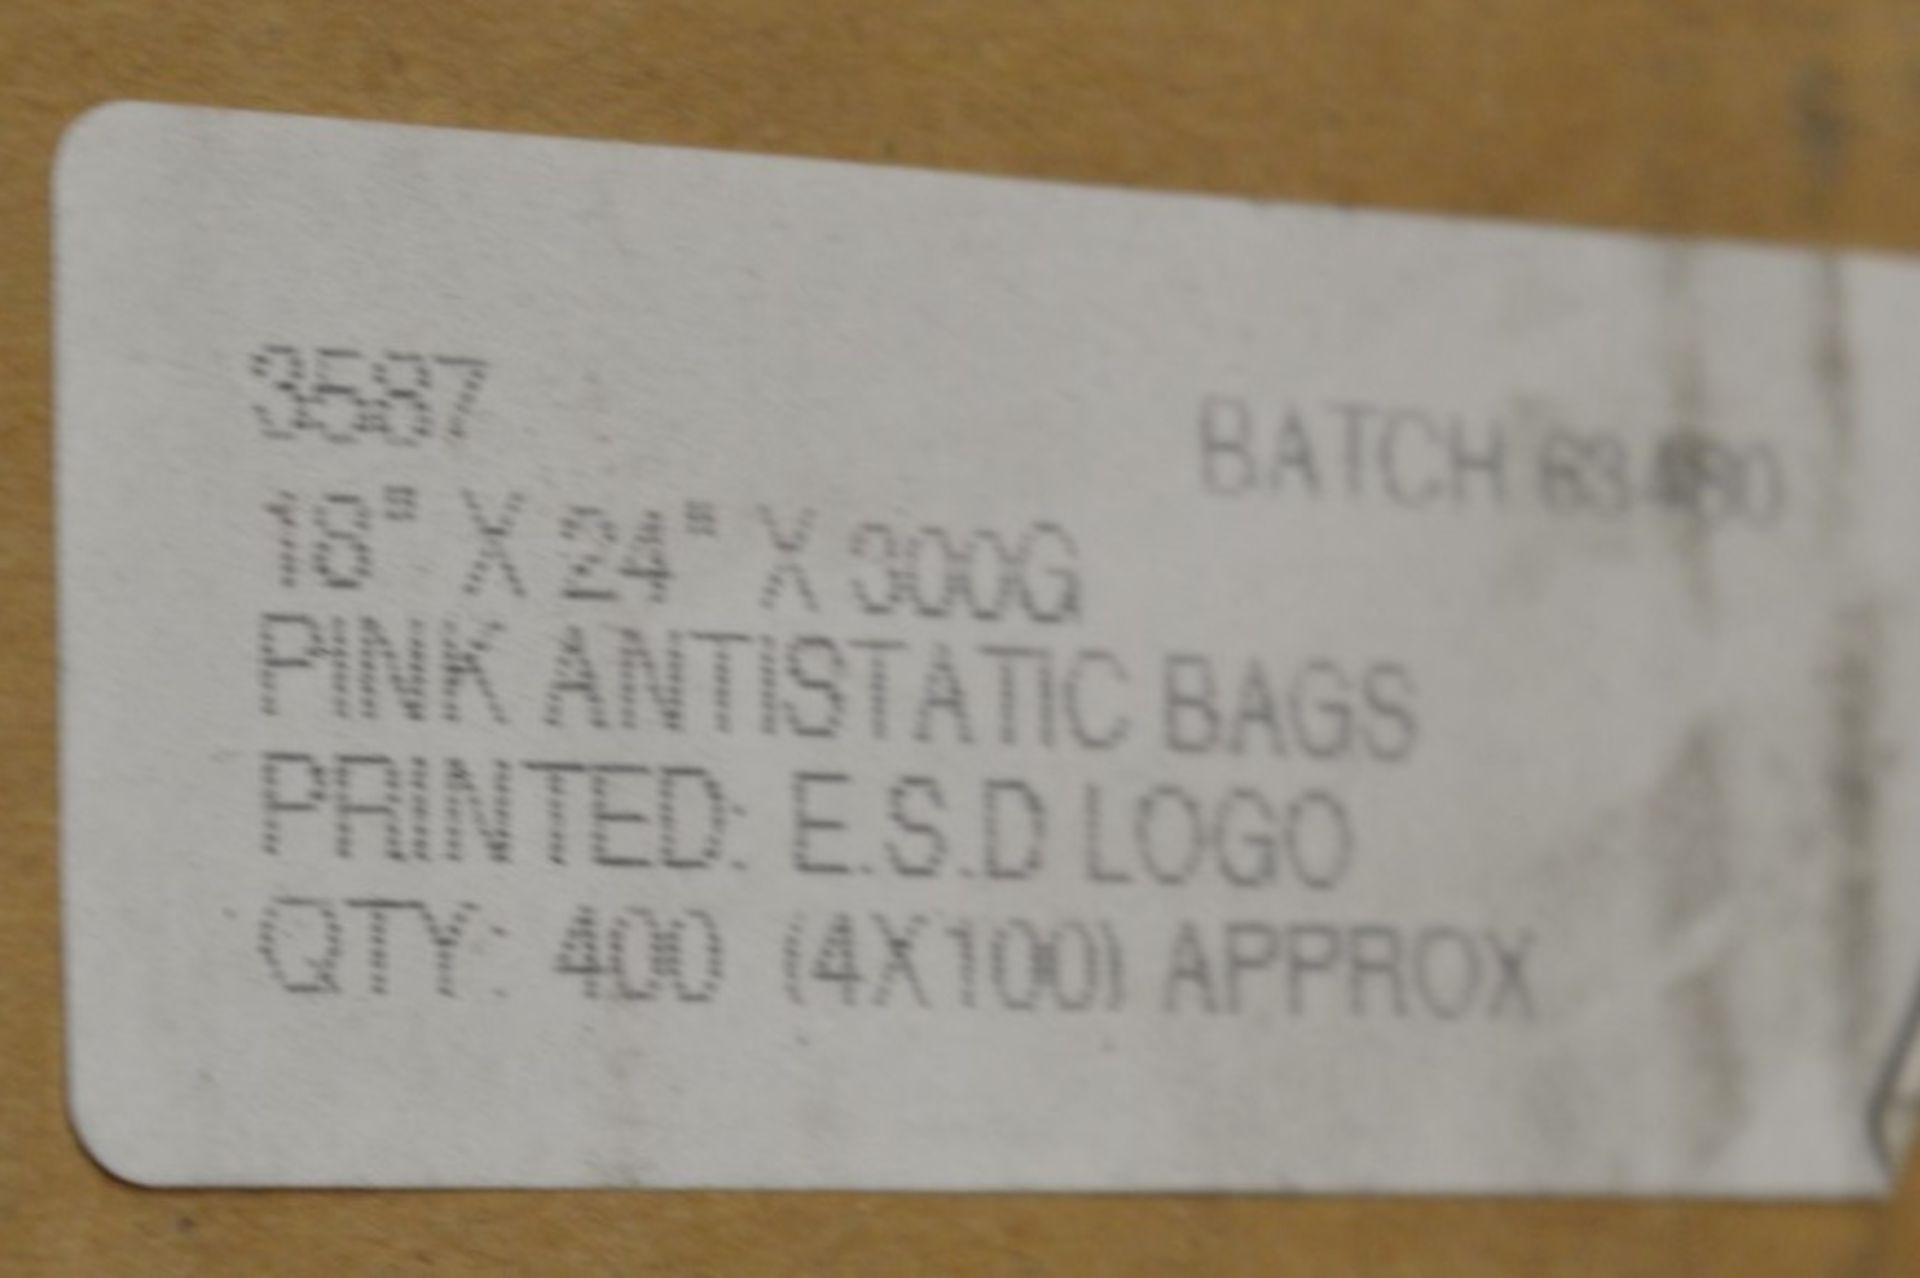 400 x Pink Antistatic ESD Logo Bags - Size 18 x 24 Inch - 300g - Full Box of 400 - Brand New Stock - - Image 2 of 2